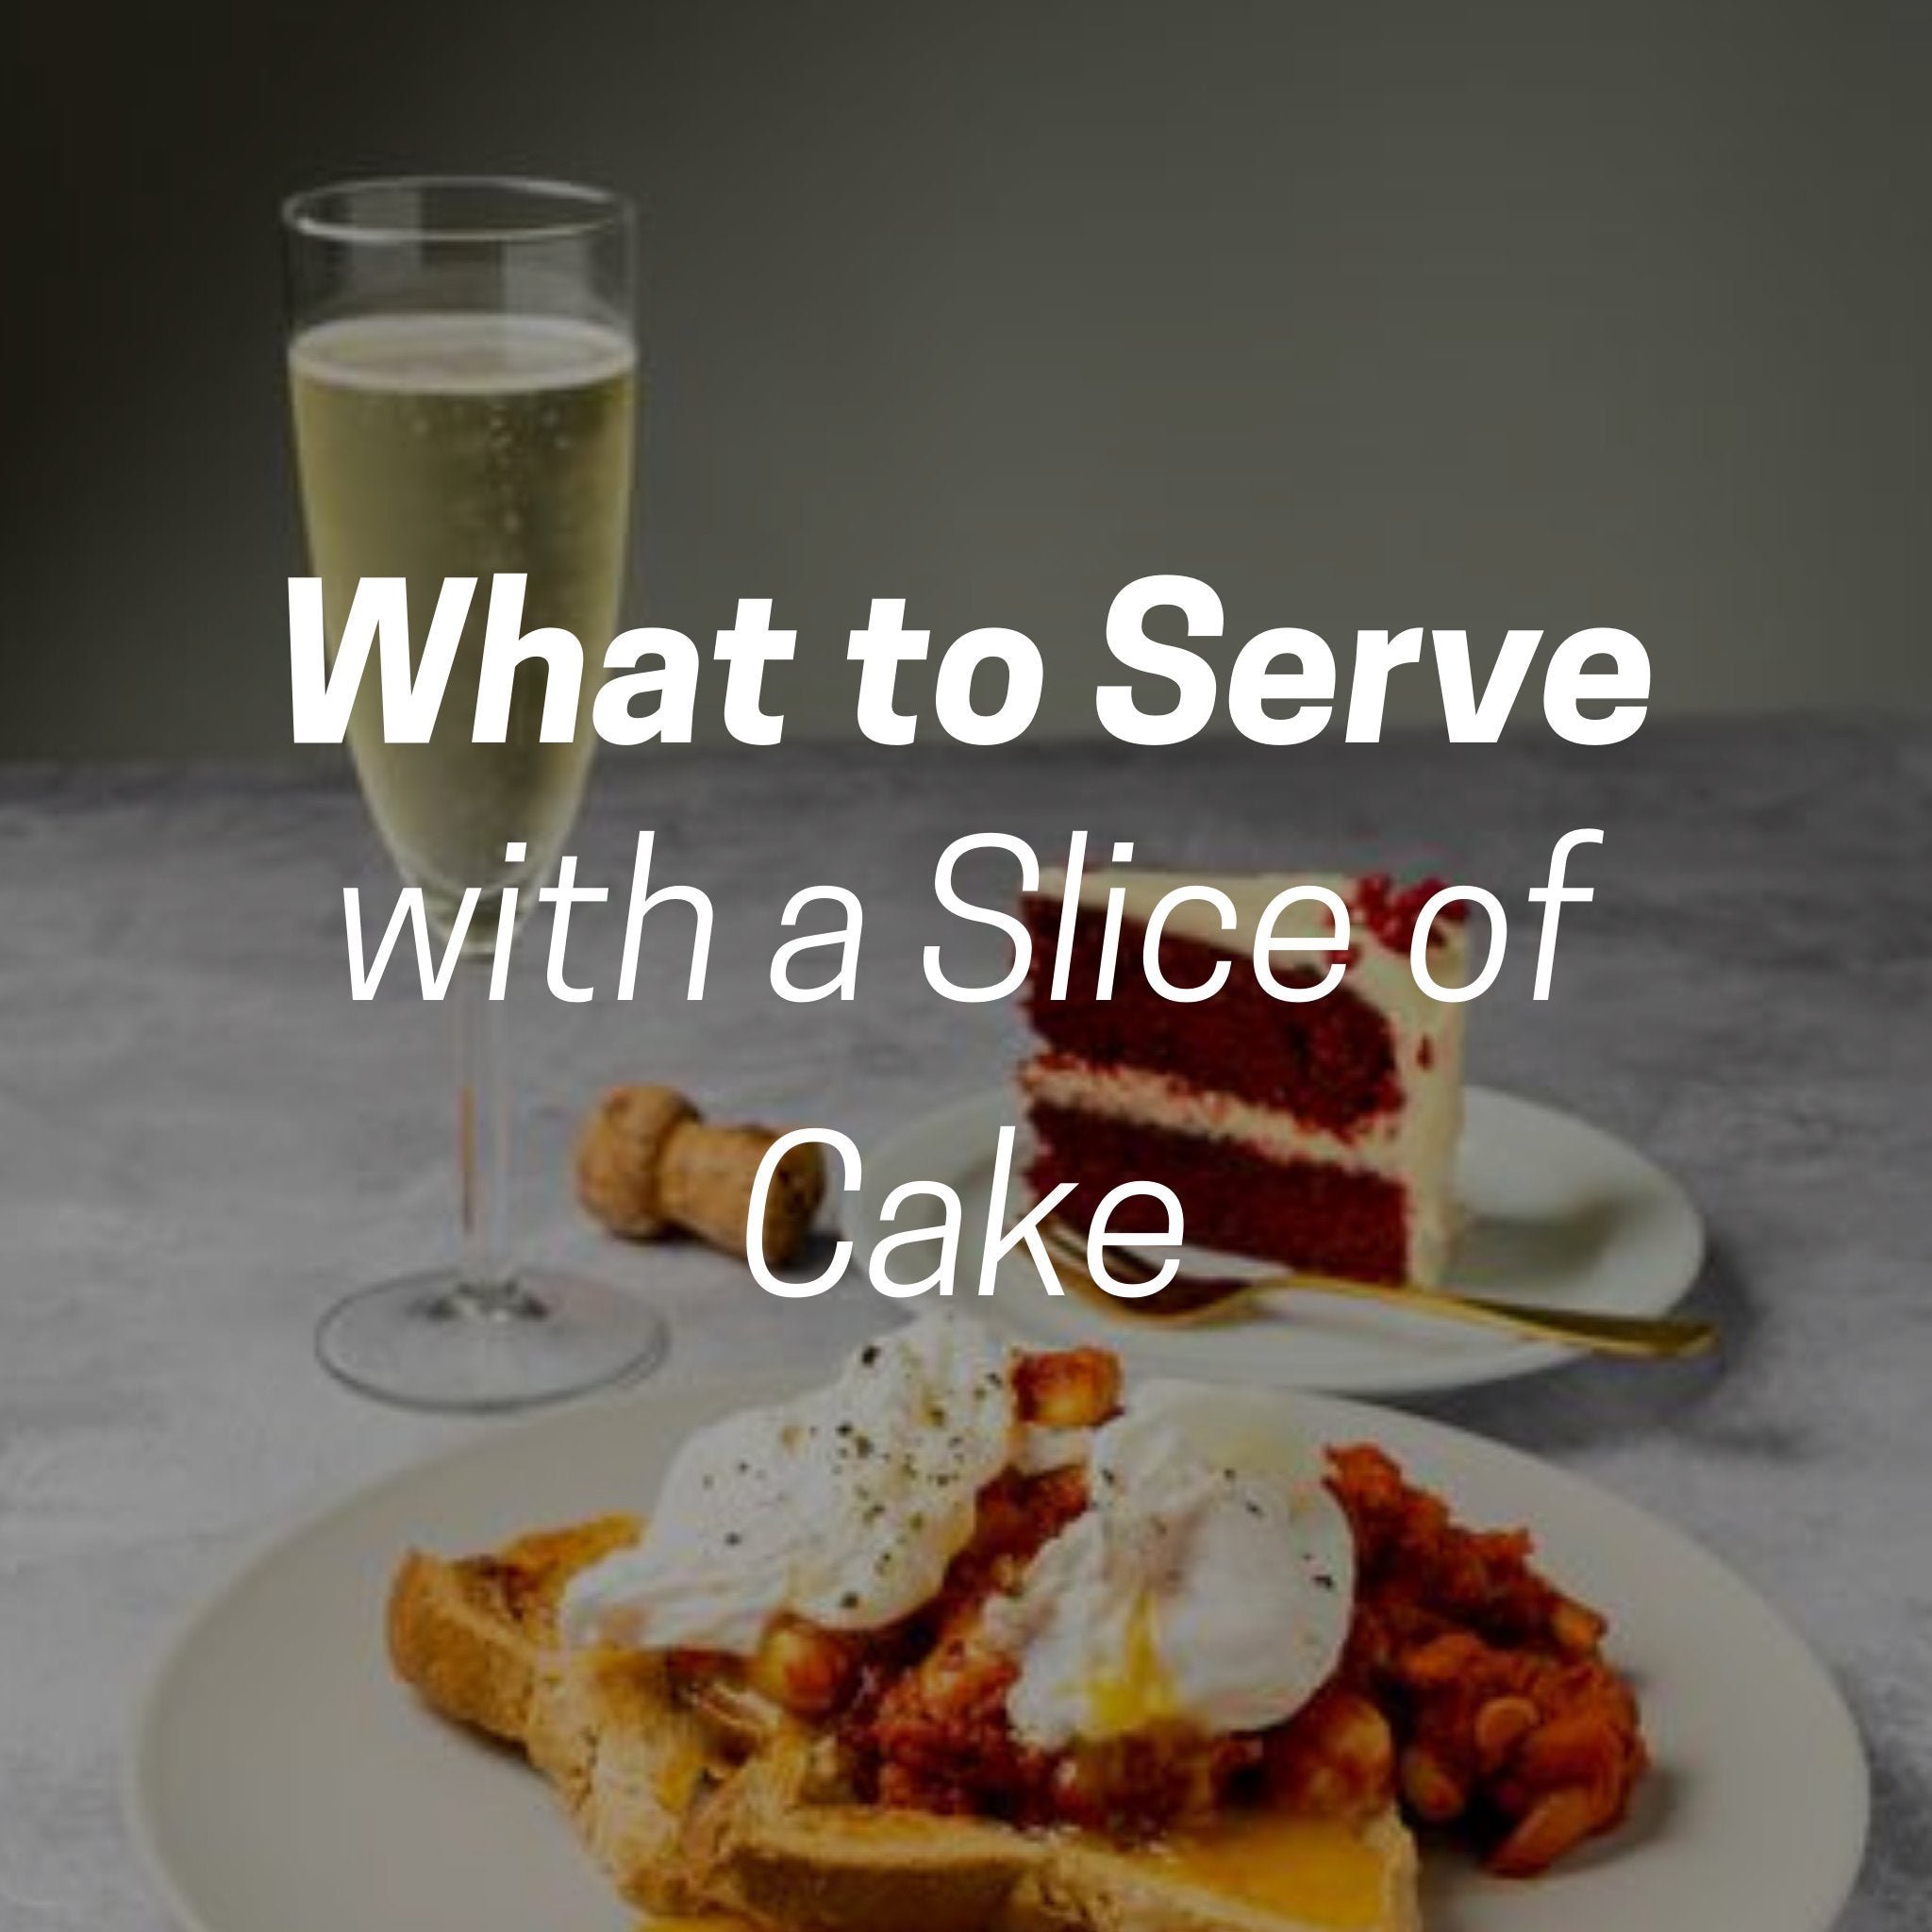 What to Serve with a Slice of Jack & Beyond Cake